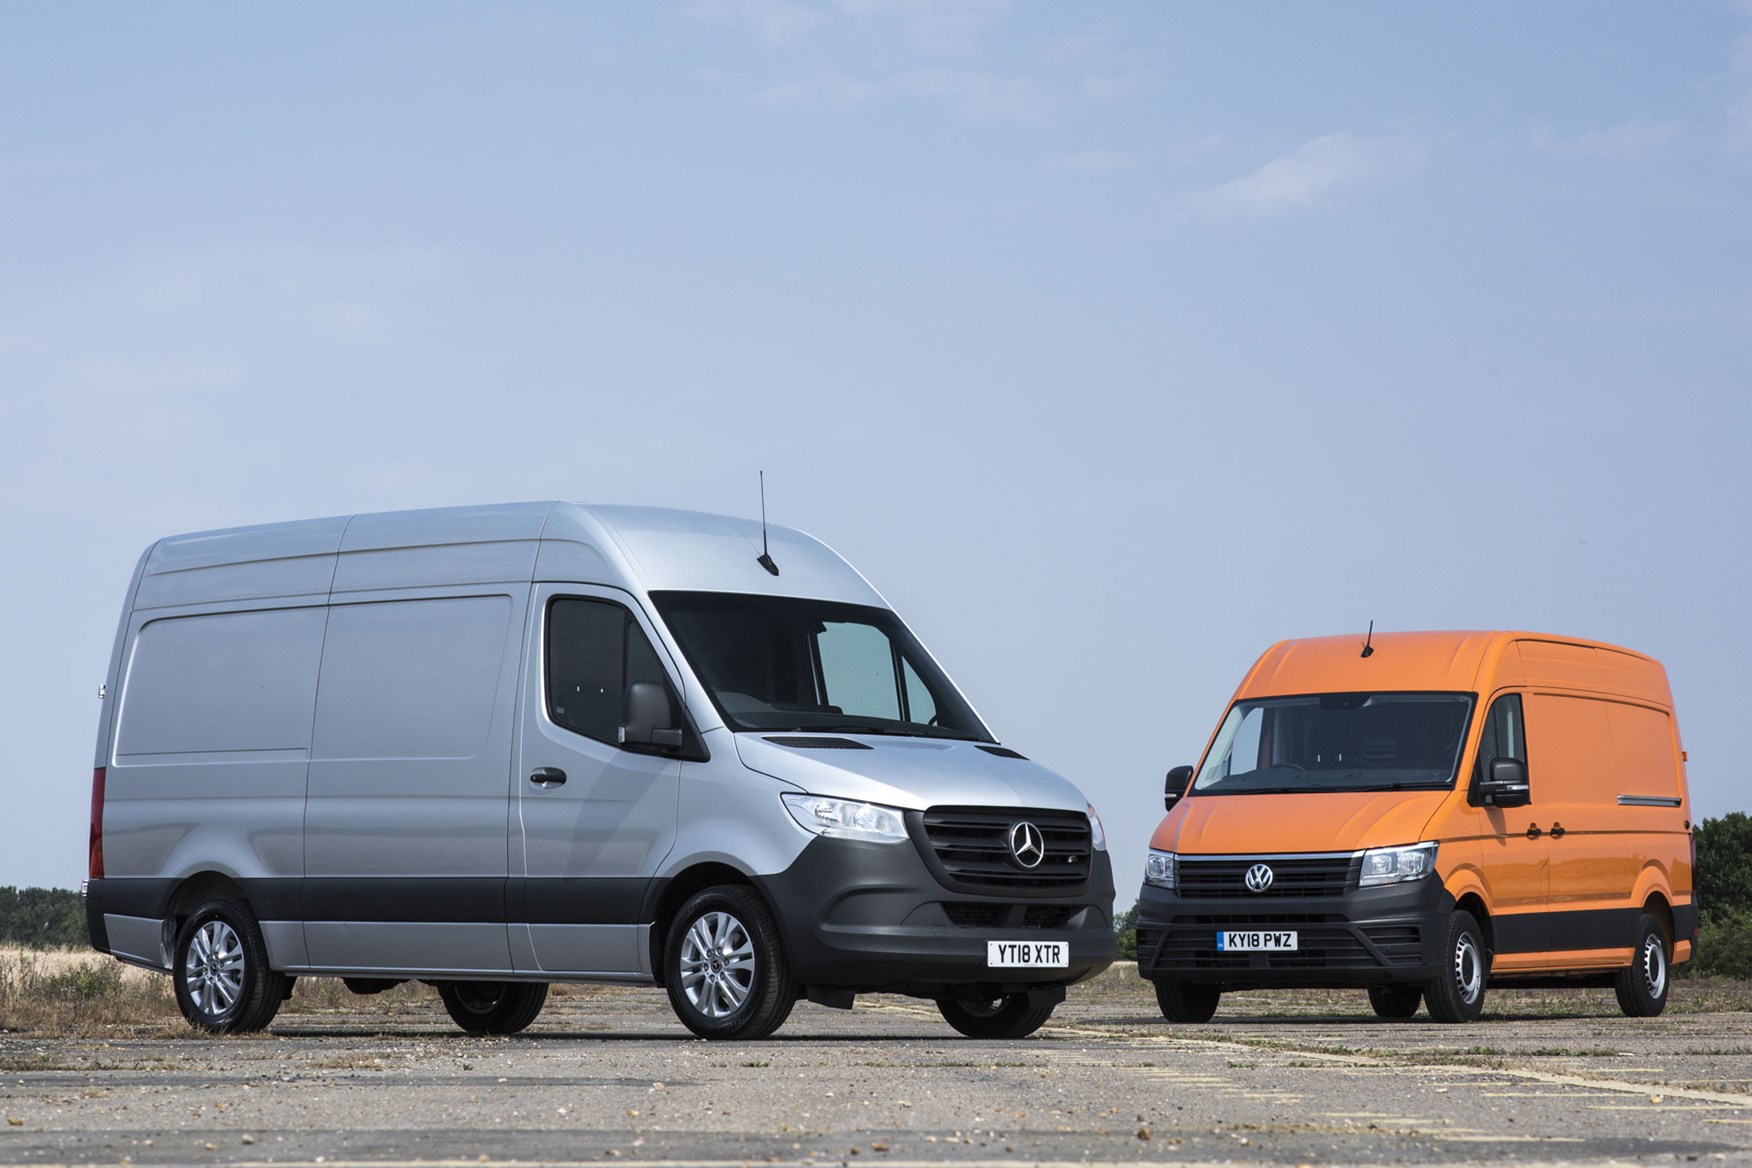 Mercedes Sprinter Vs Vw Crafter Twin Test Review Which Premium Large Van Is Best Parkers